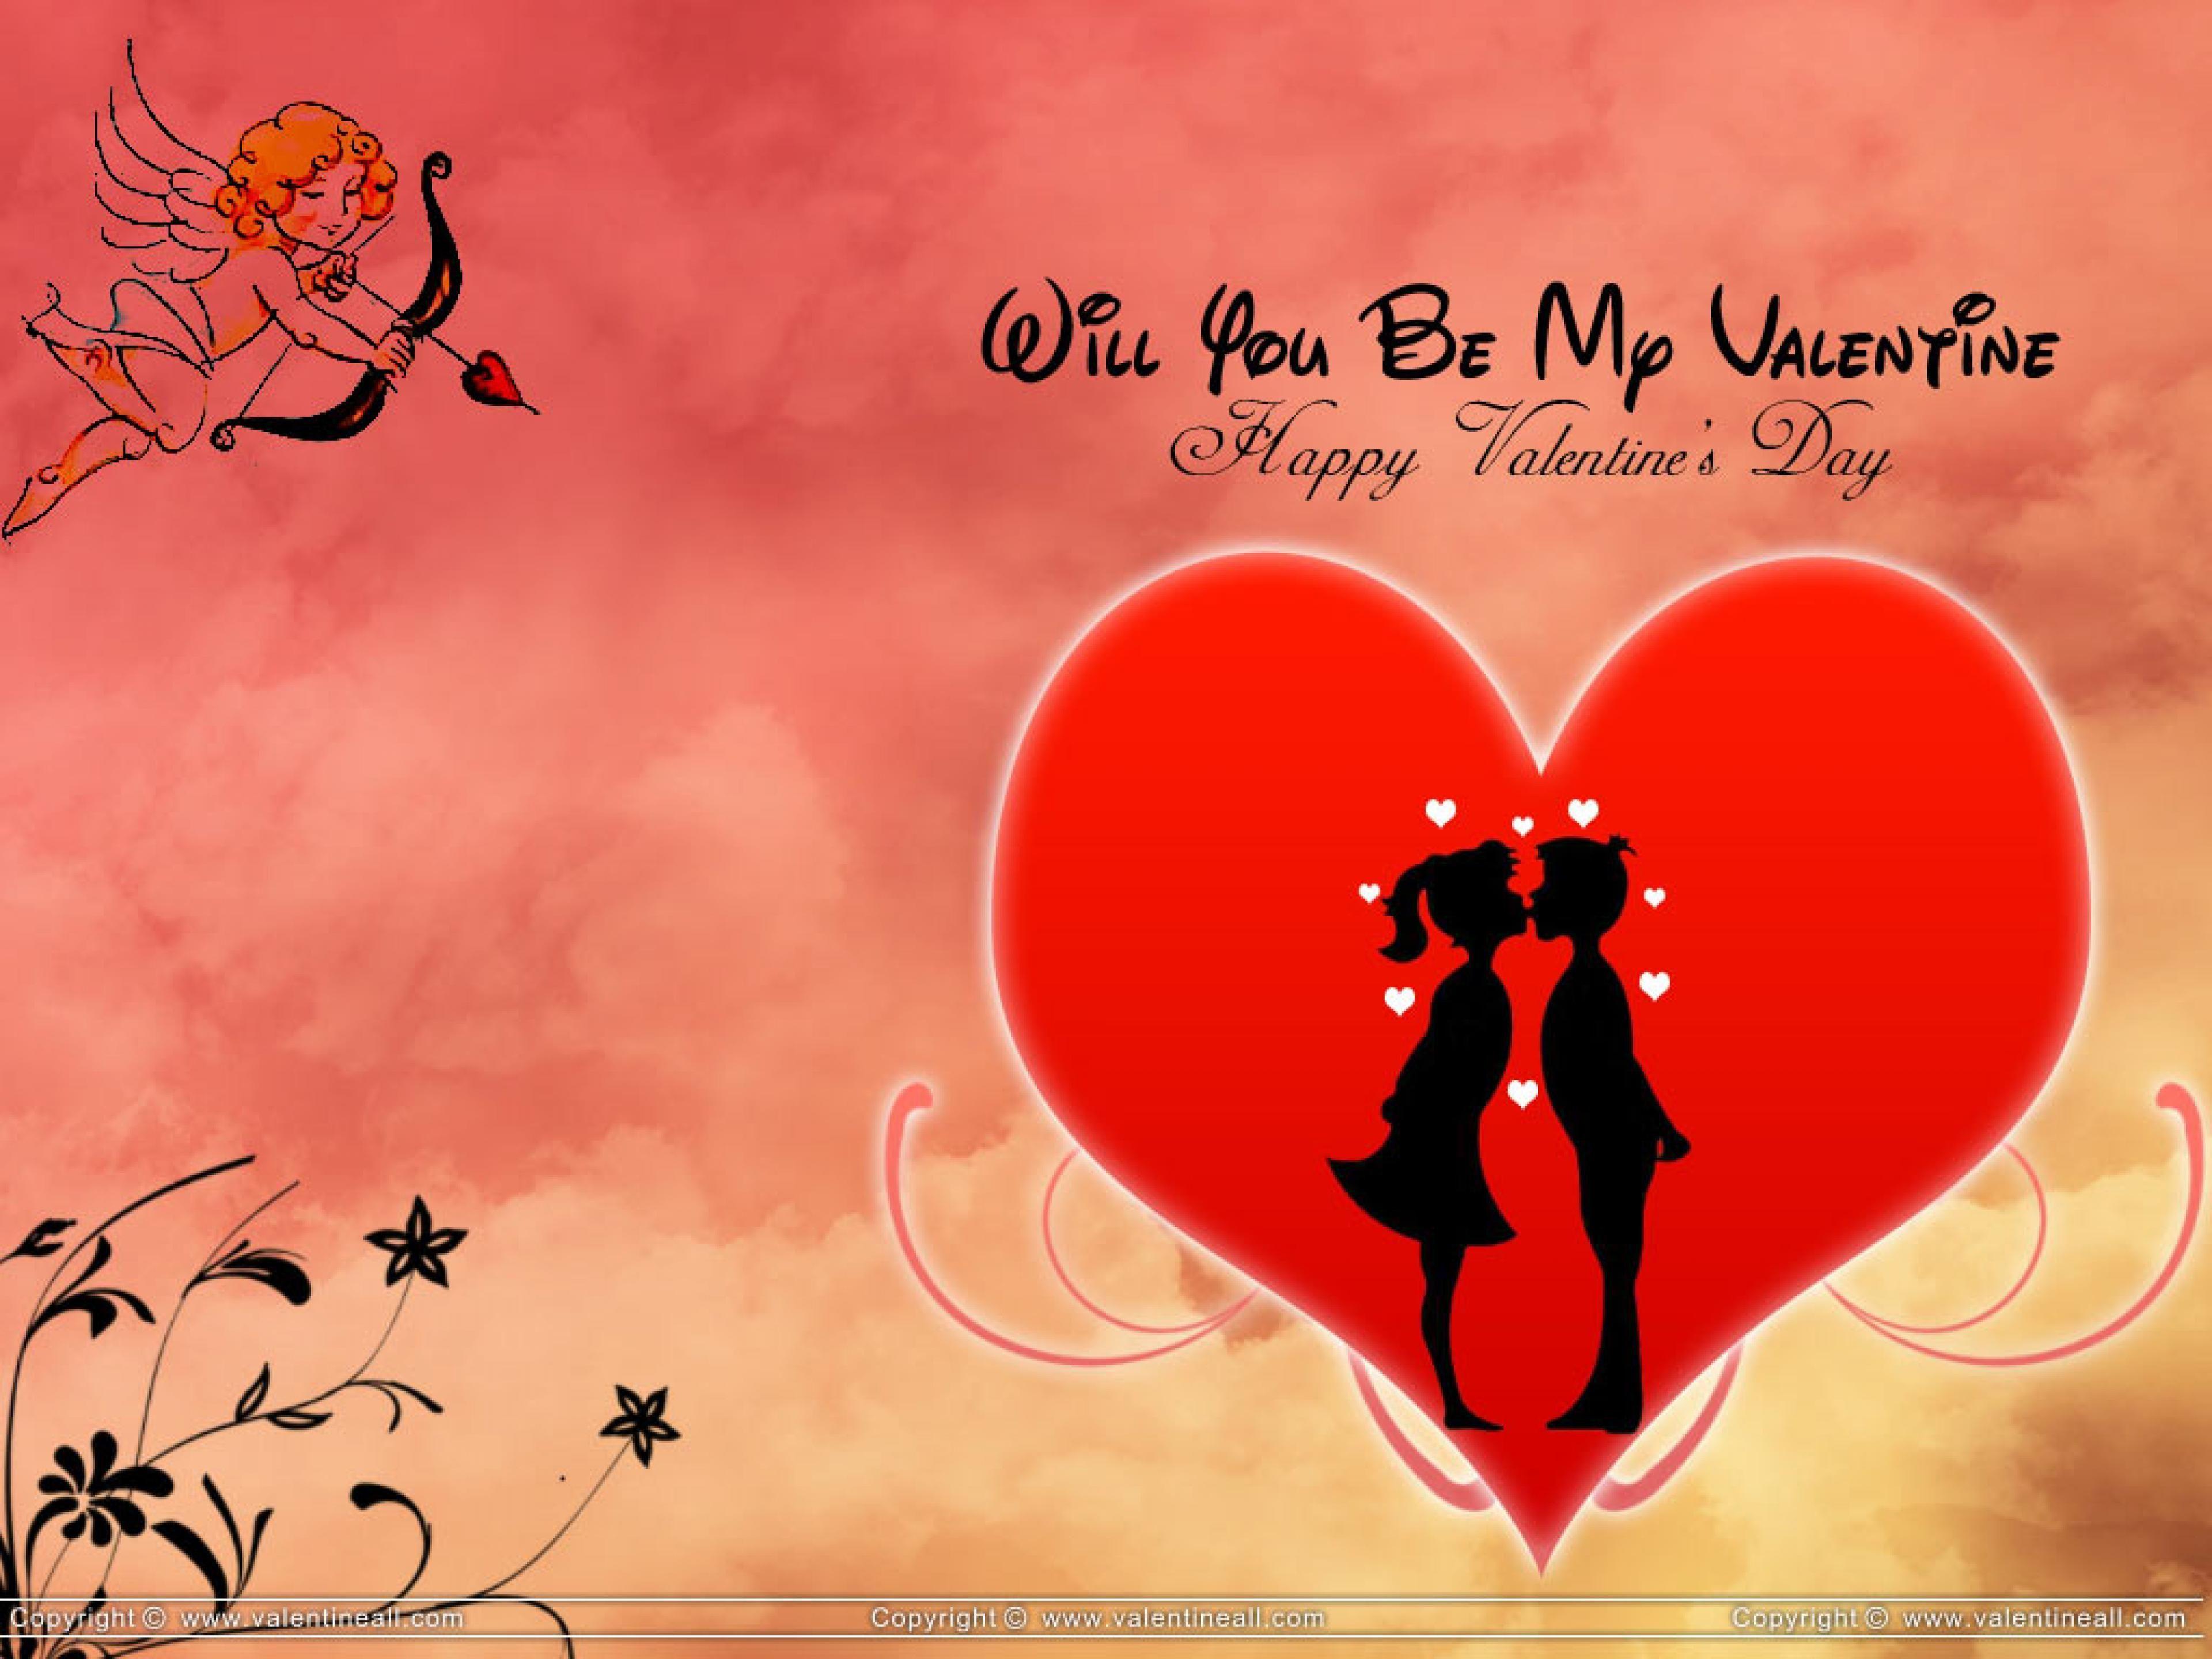 Heart Kiss Background Wallpaper You Be My Valentine. Happy